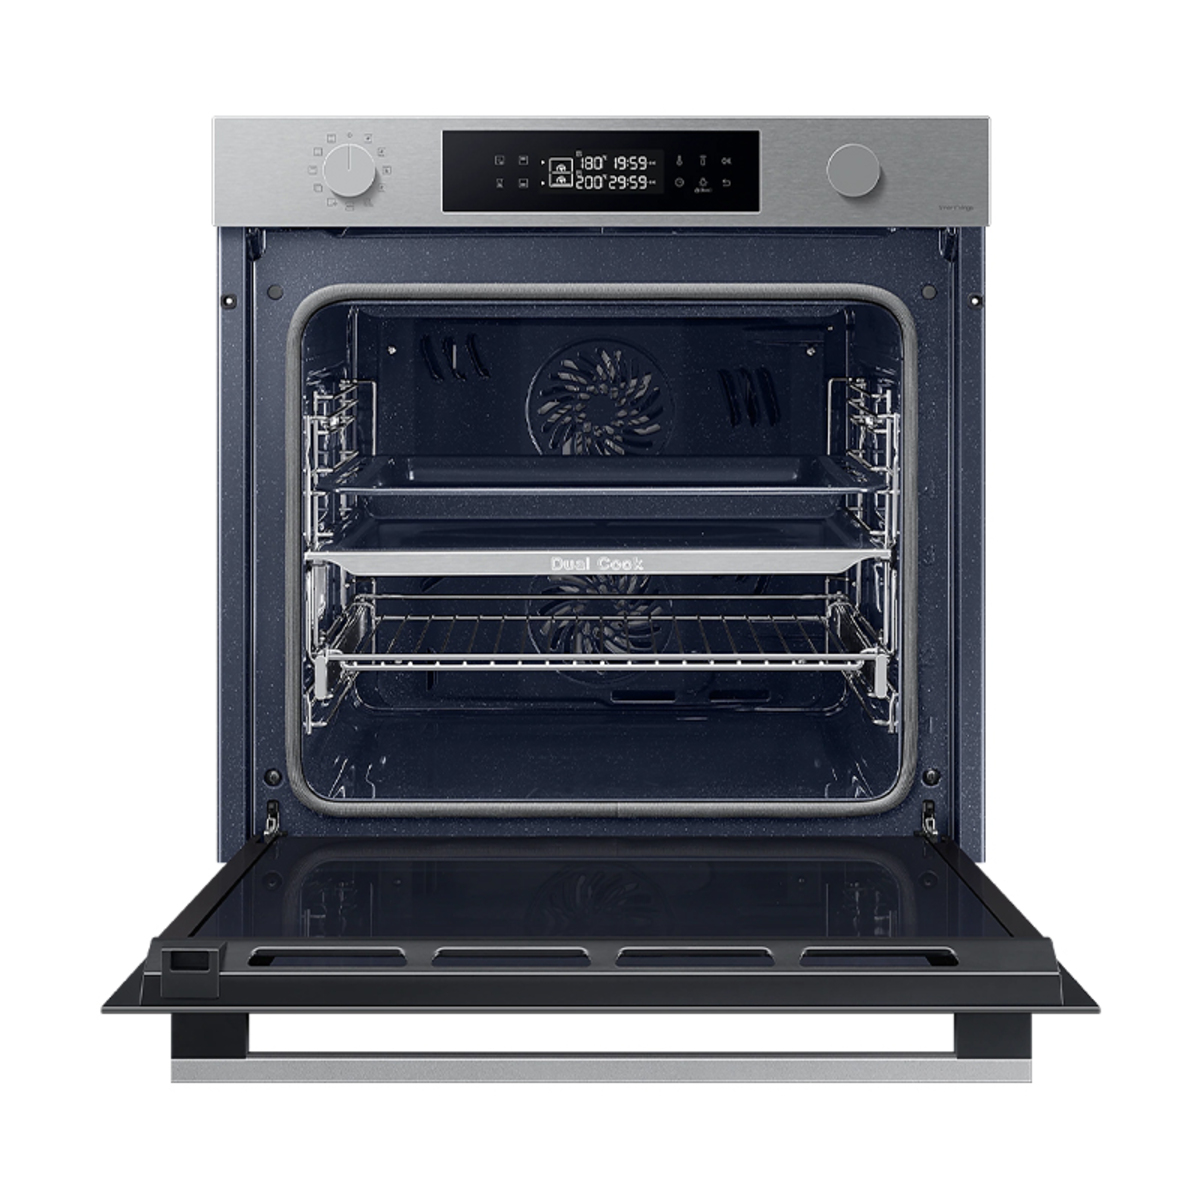 Samsung NV7B4430ZAS Series 4 76L Electric Smart Oven with Dual Cook